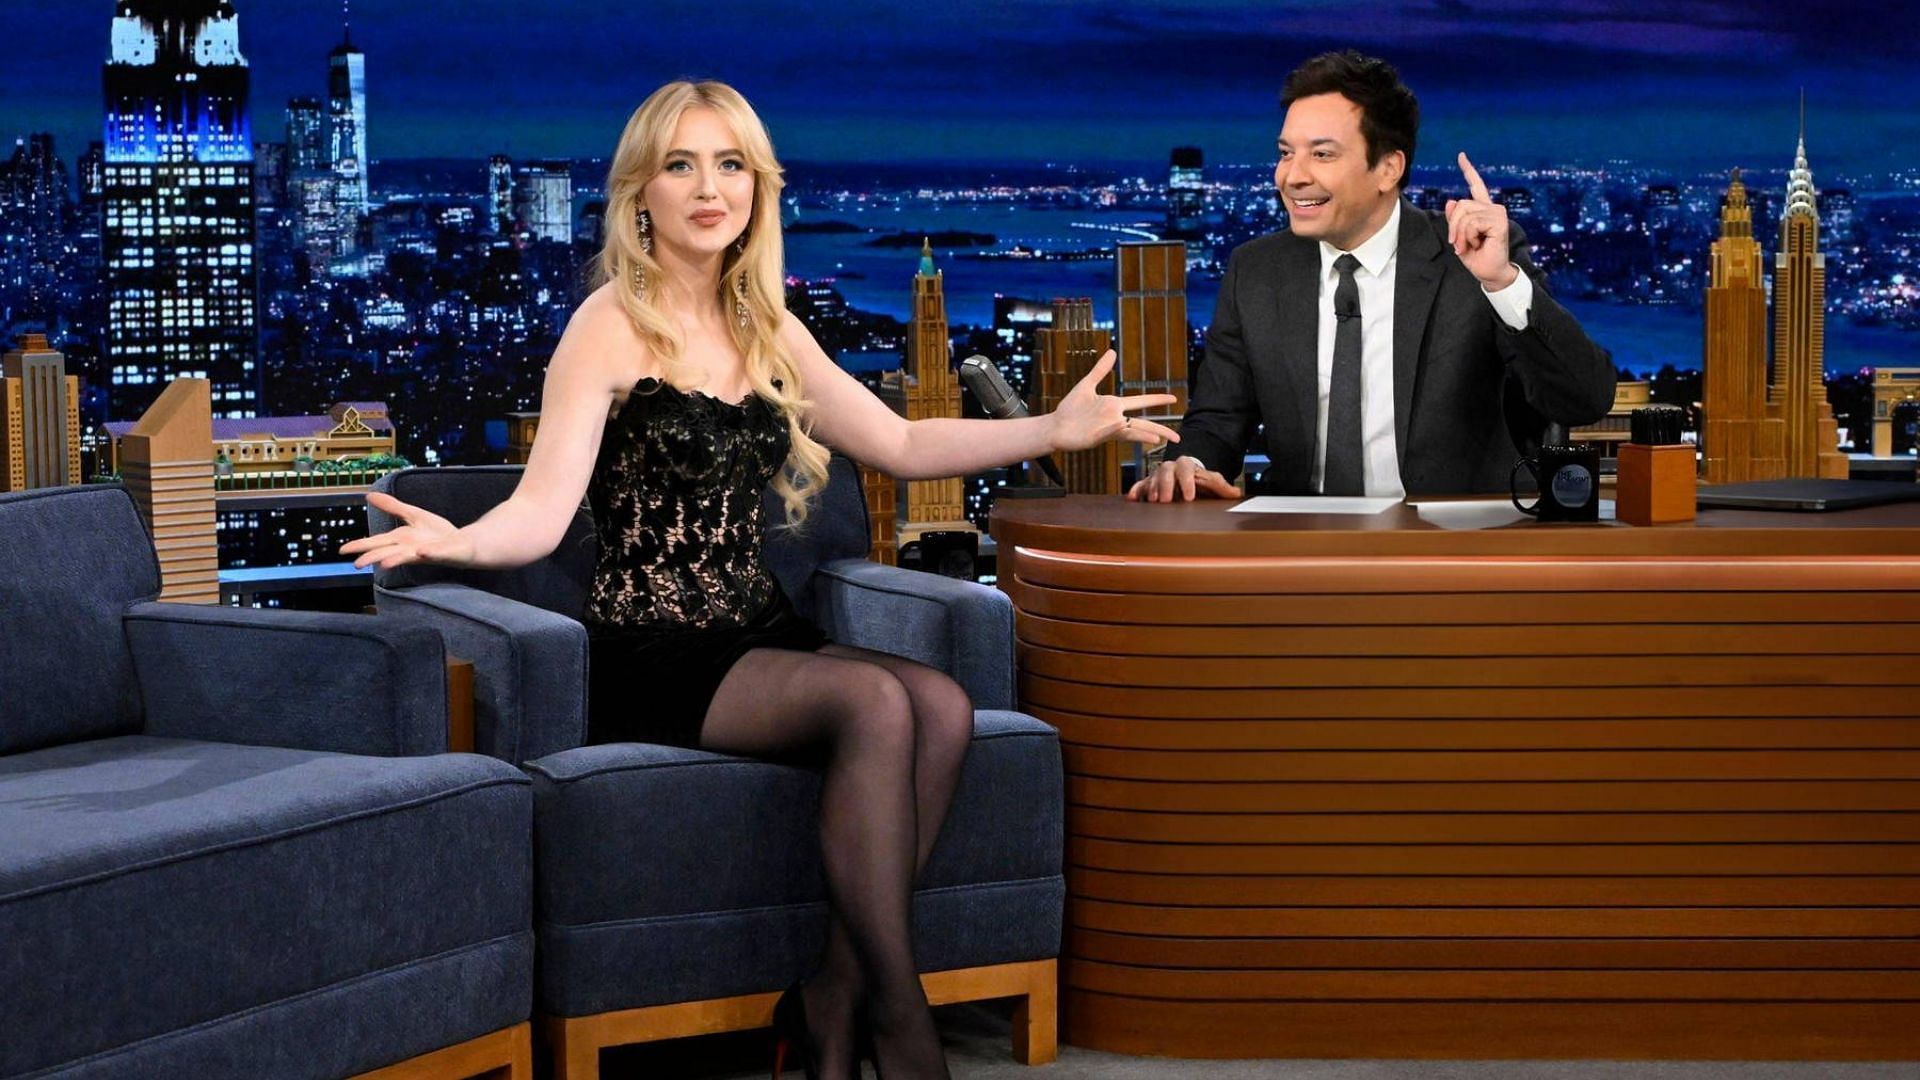 Kathryn Newton&rsquo;s look for Jimmy Fallon&rsquo;s The Tonight Show wins the internet